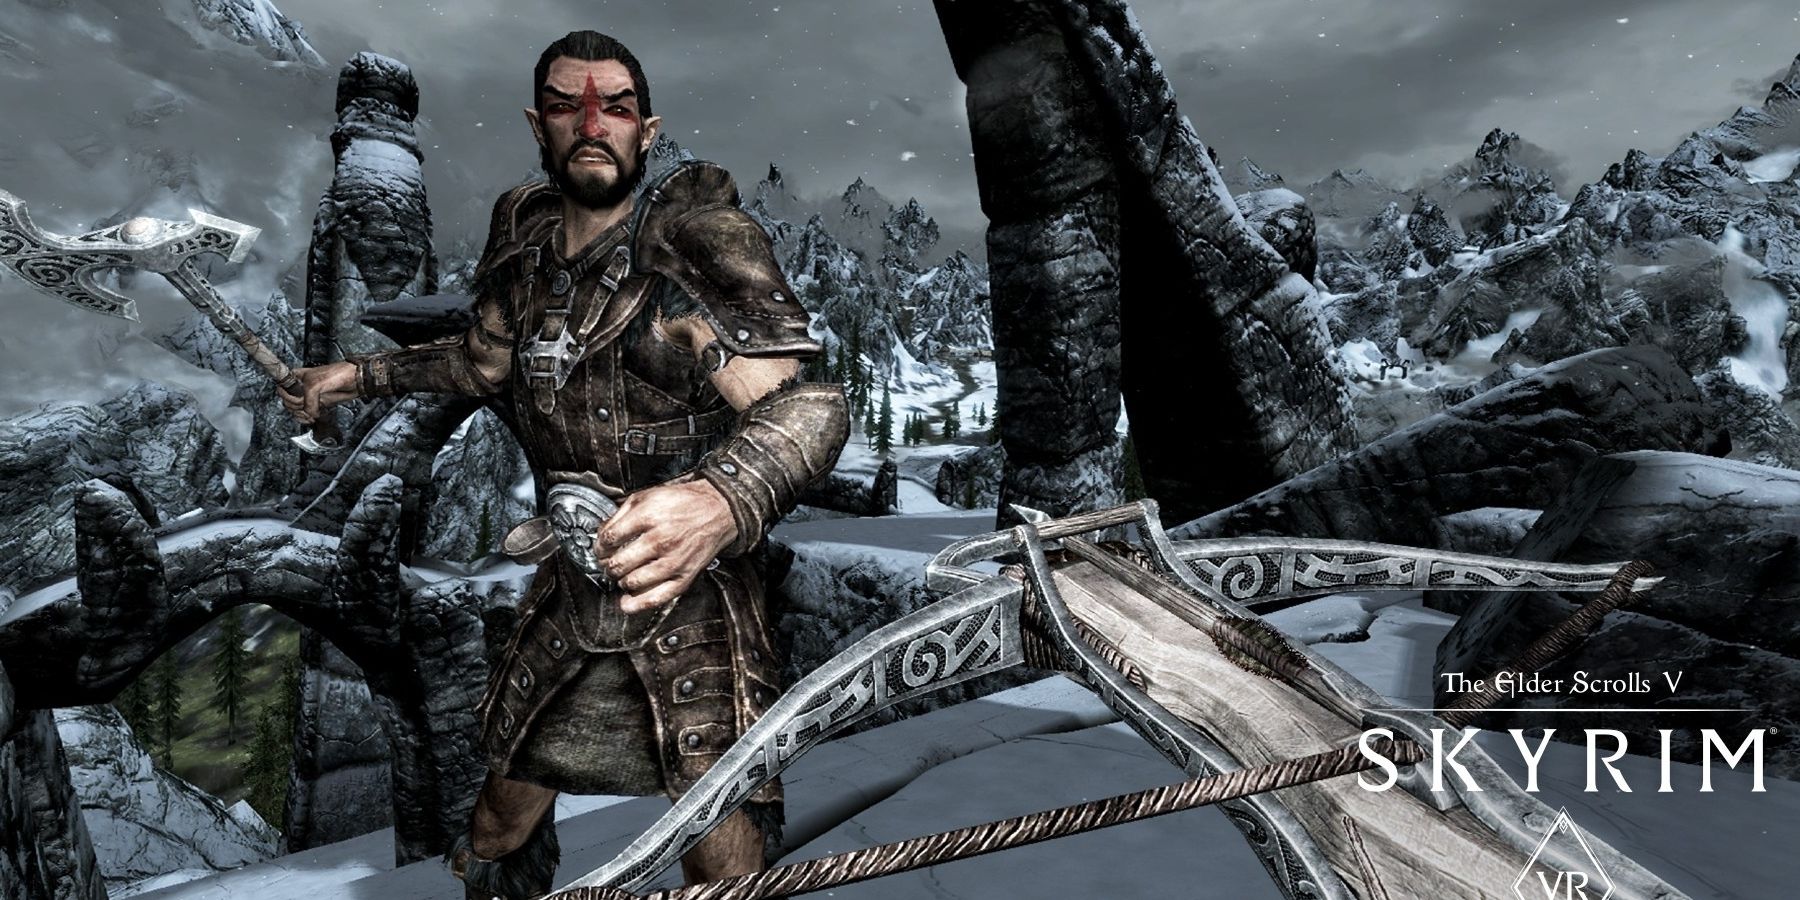 The Dragonborn fighting an enemy with a crossbow in Skyrim